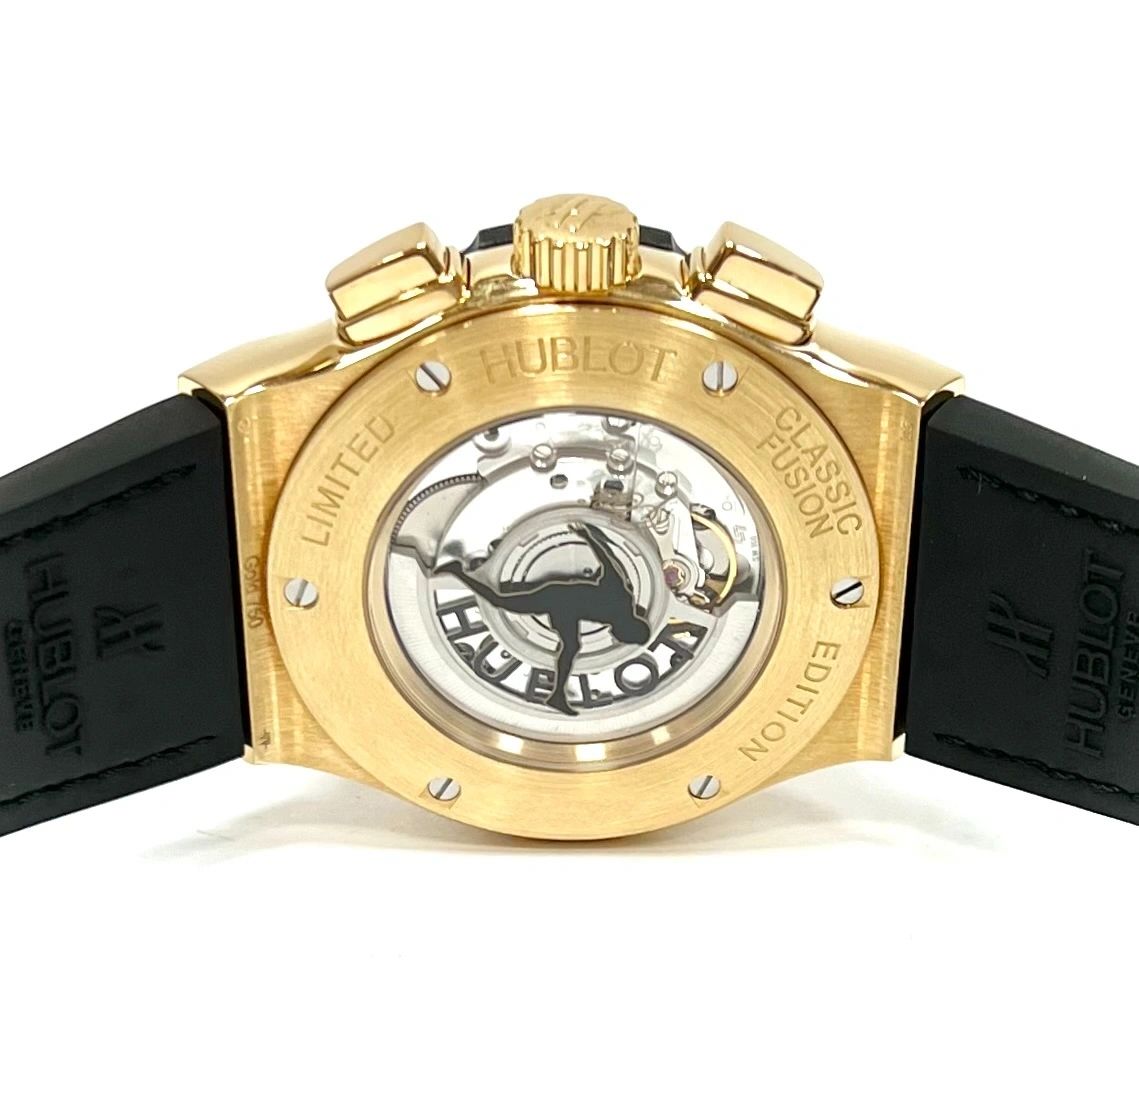 Hublot Classic Fusion Limited Edition "Pele" 45mm Yellow Gold